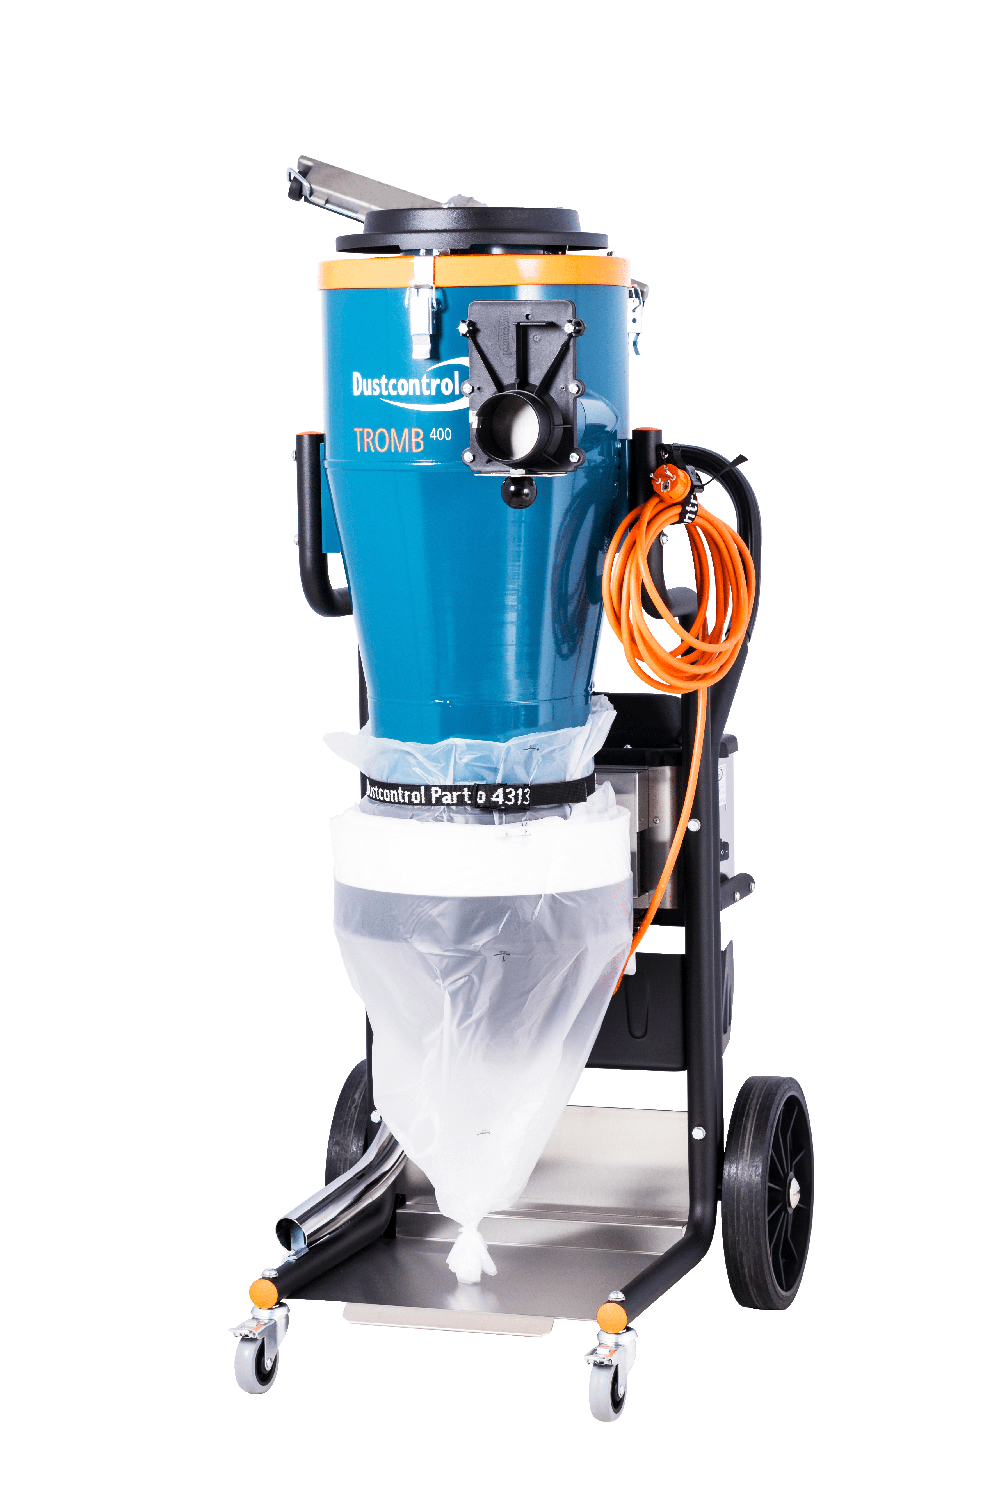 Tromb 400L Dust Collector - Xtreme Polishing Systems - dust collectors, dust collector systems, concrete dust extractors - dust collectors, dust collector systems, concrete dust extractors, concrete dust vacuum, dust collector vacuum, dust control vacuums, concrete grinding vacuums